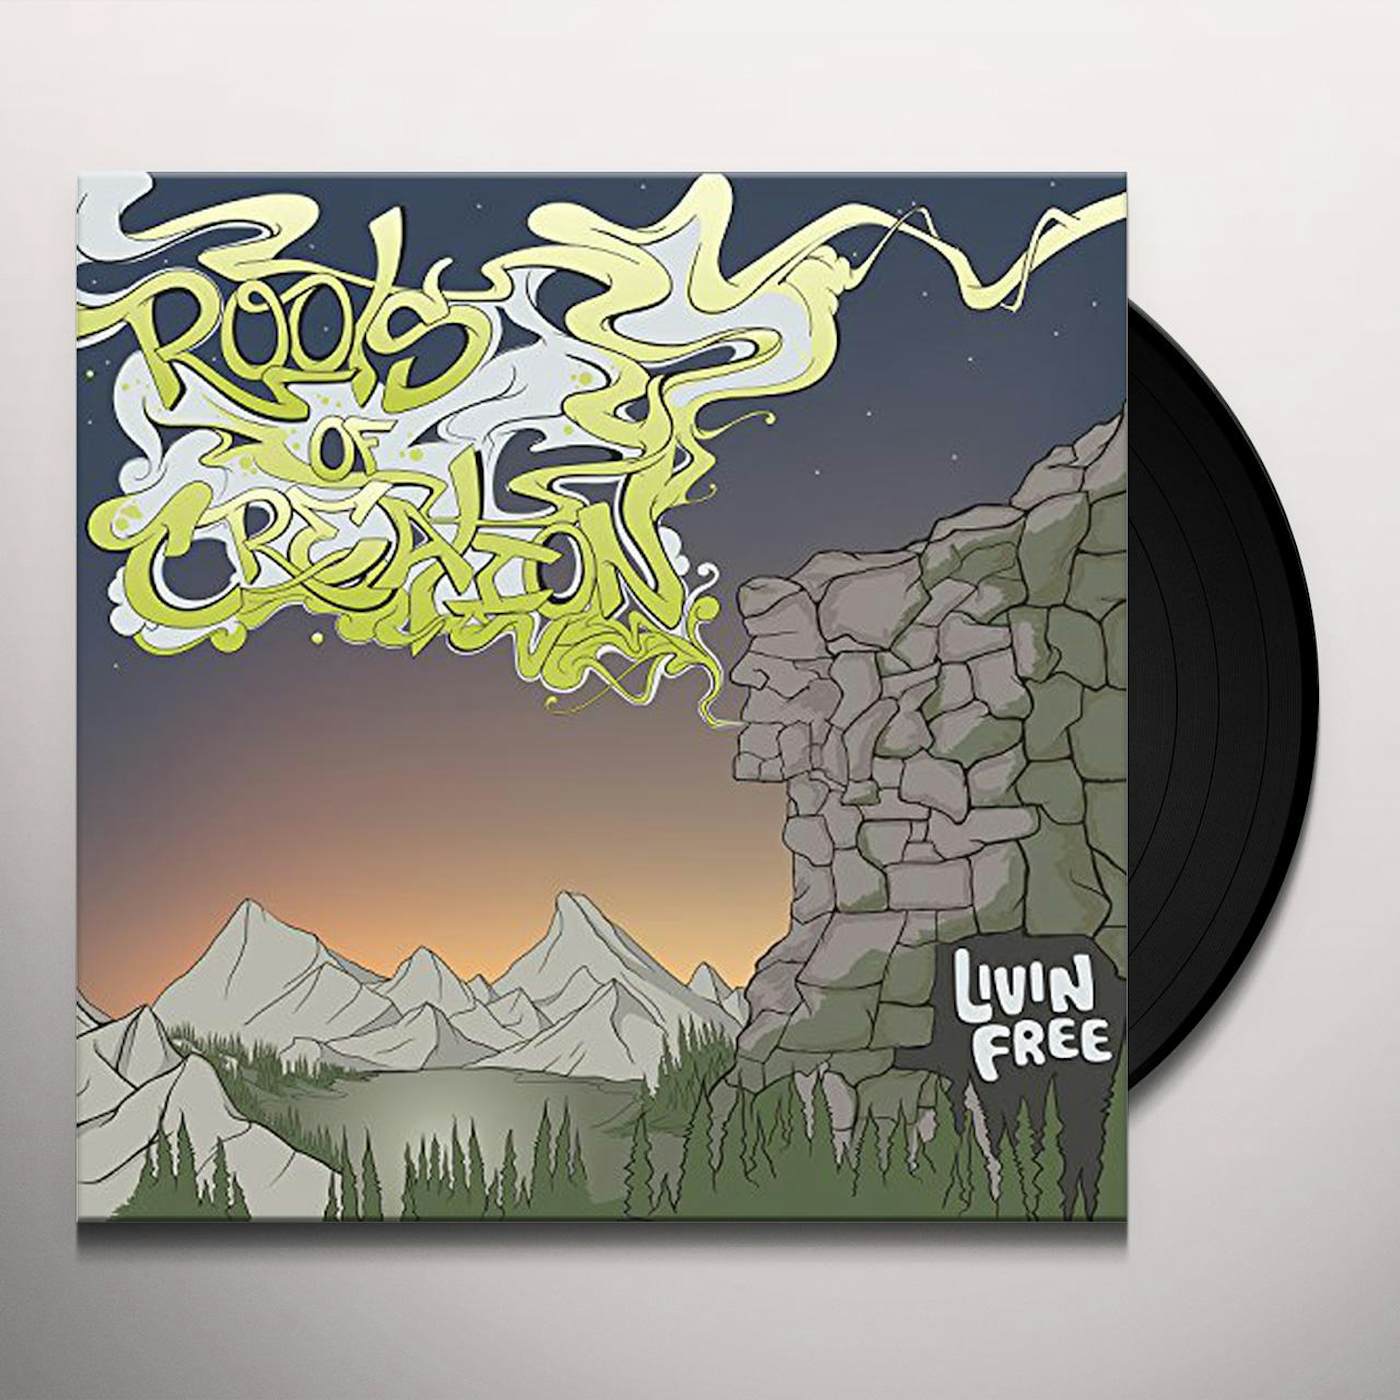 Roots of Creation Livin Free Vinyl Record